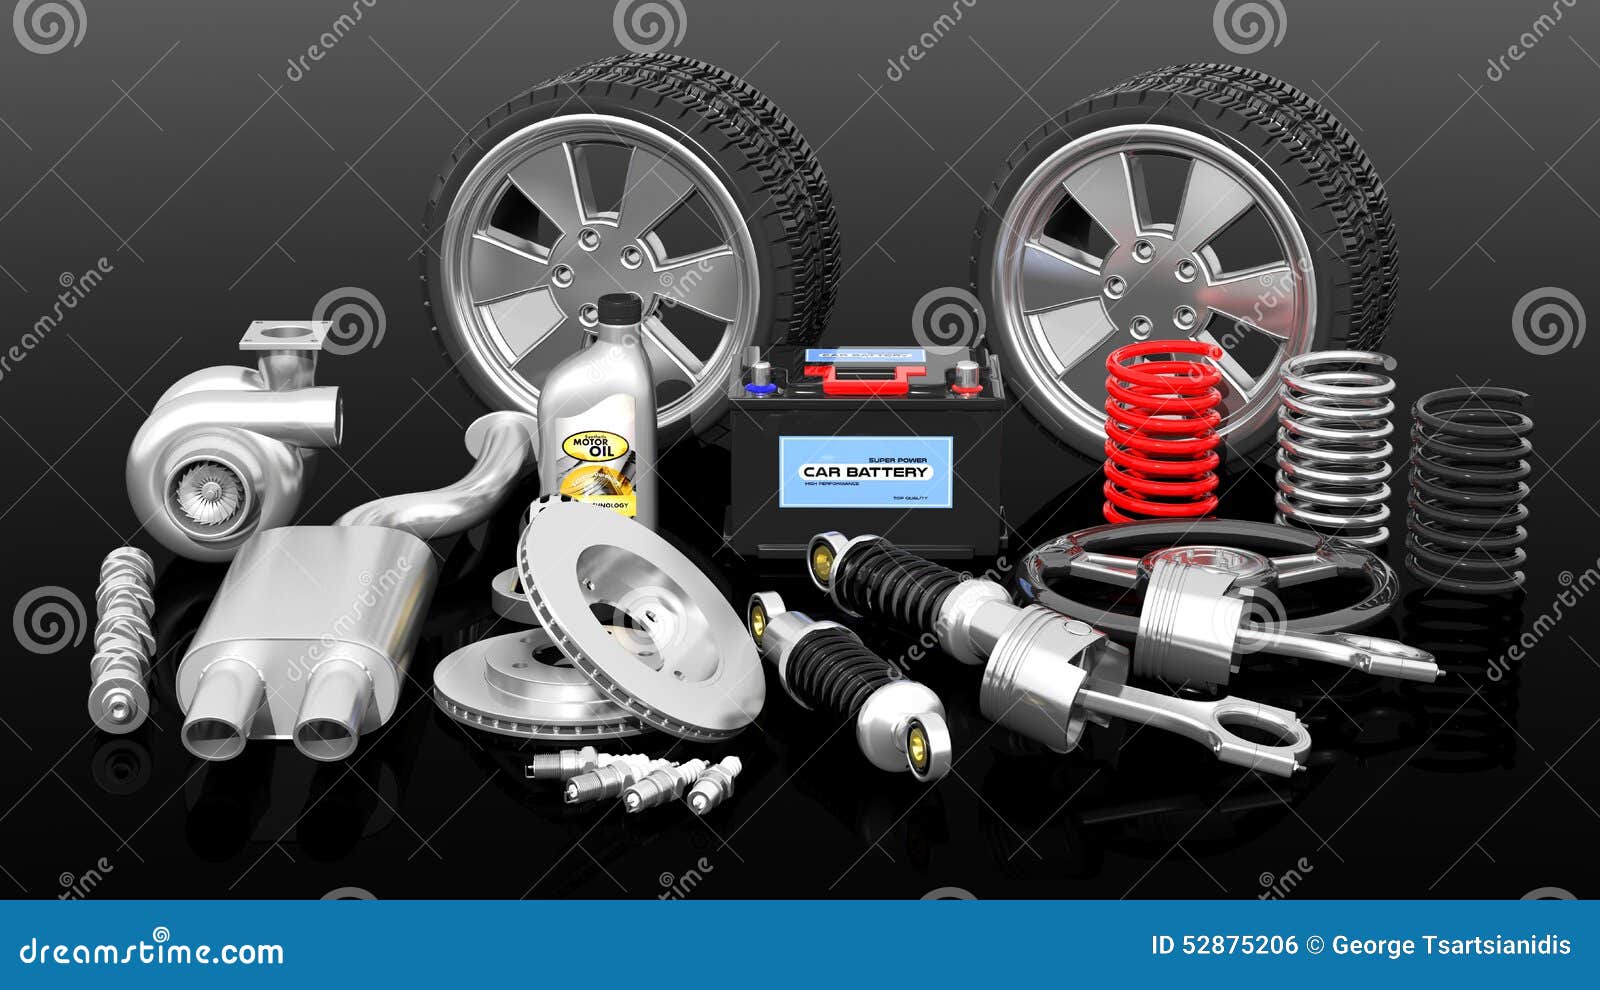 PARTS and ACCESSORIES